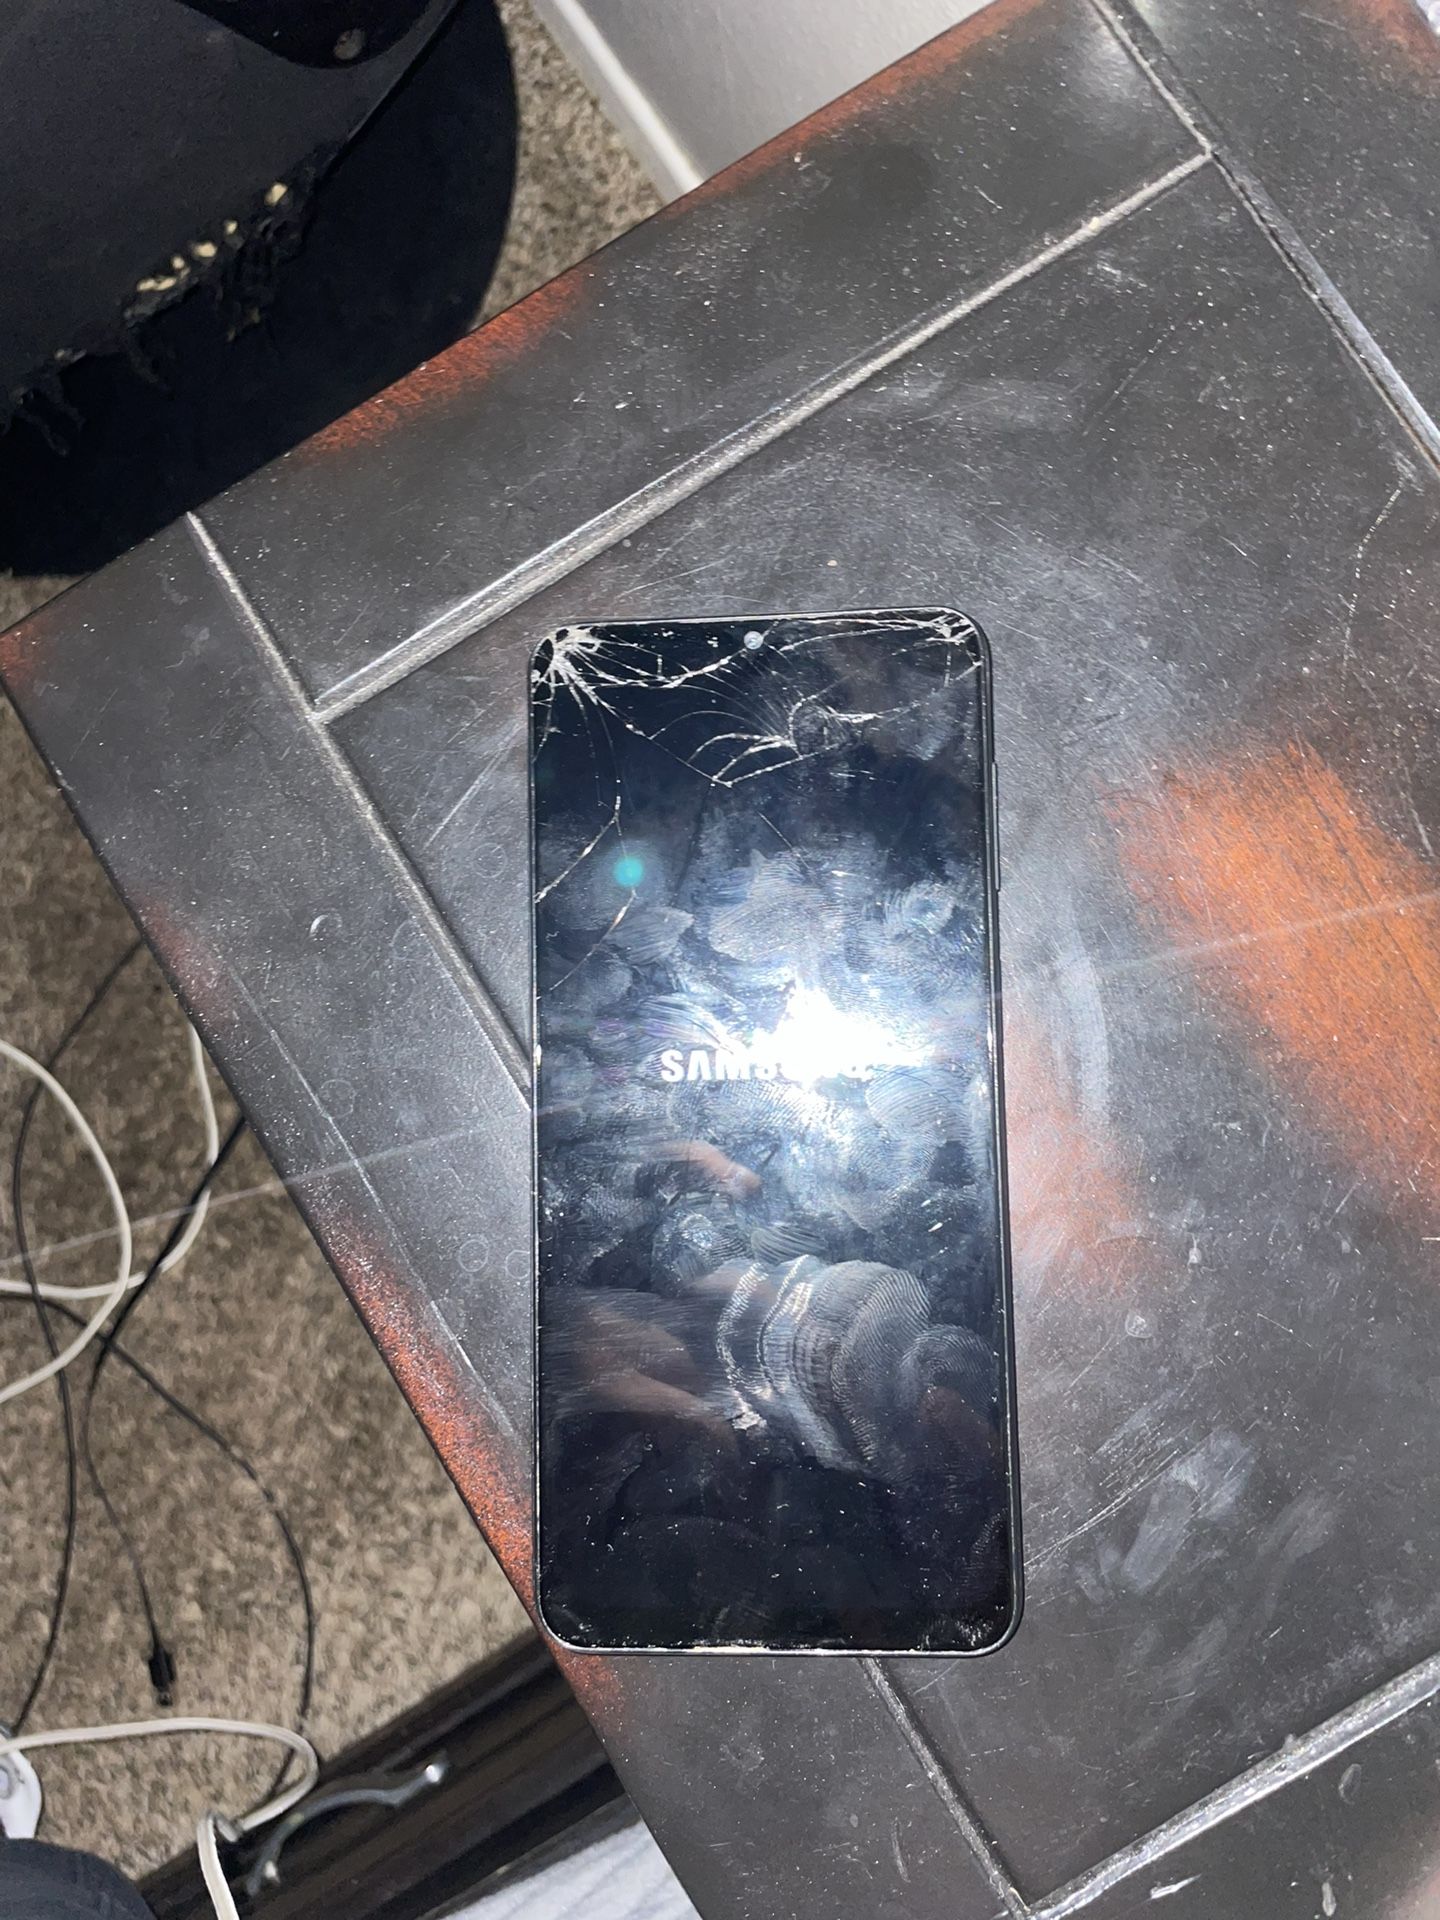 Samsung A12 40$ Works Cracked Screen